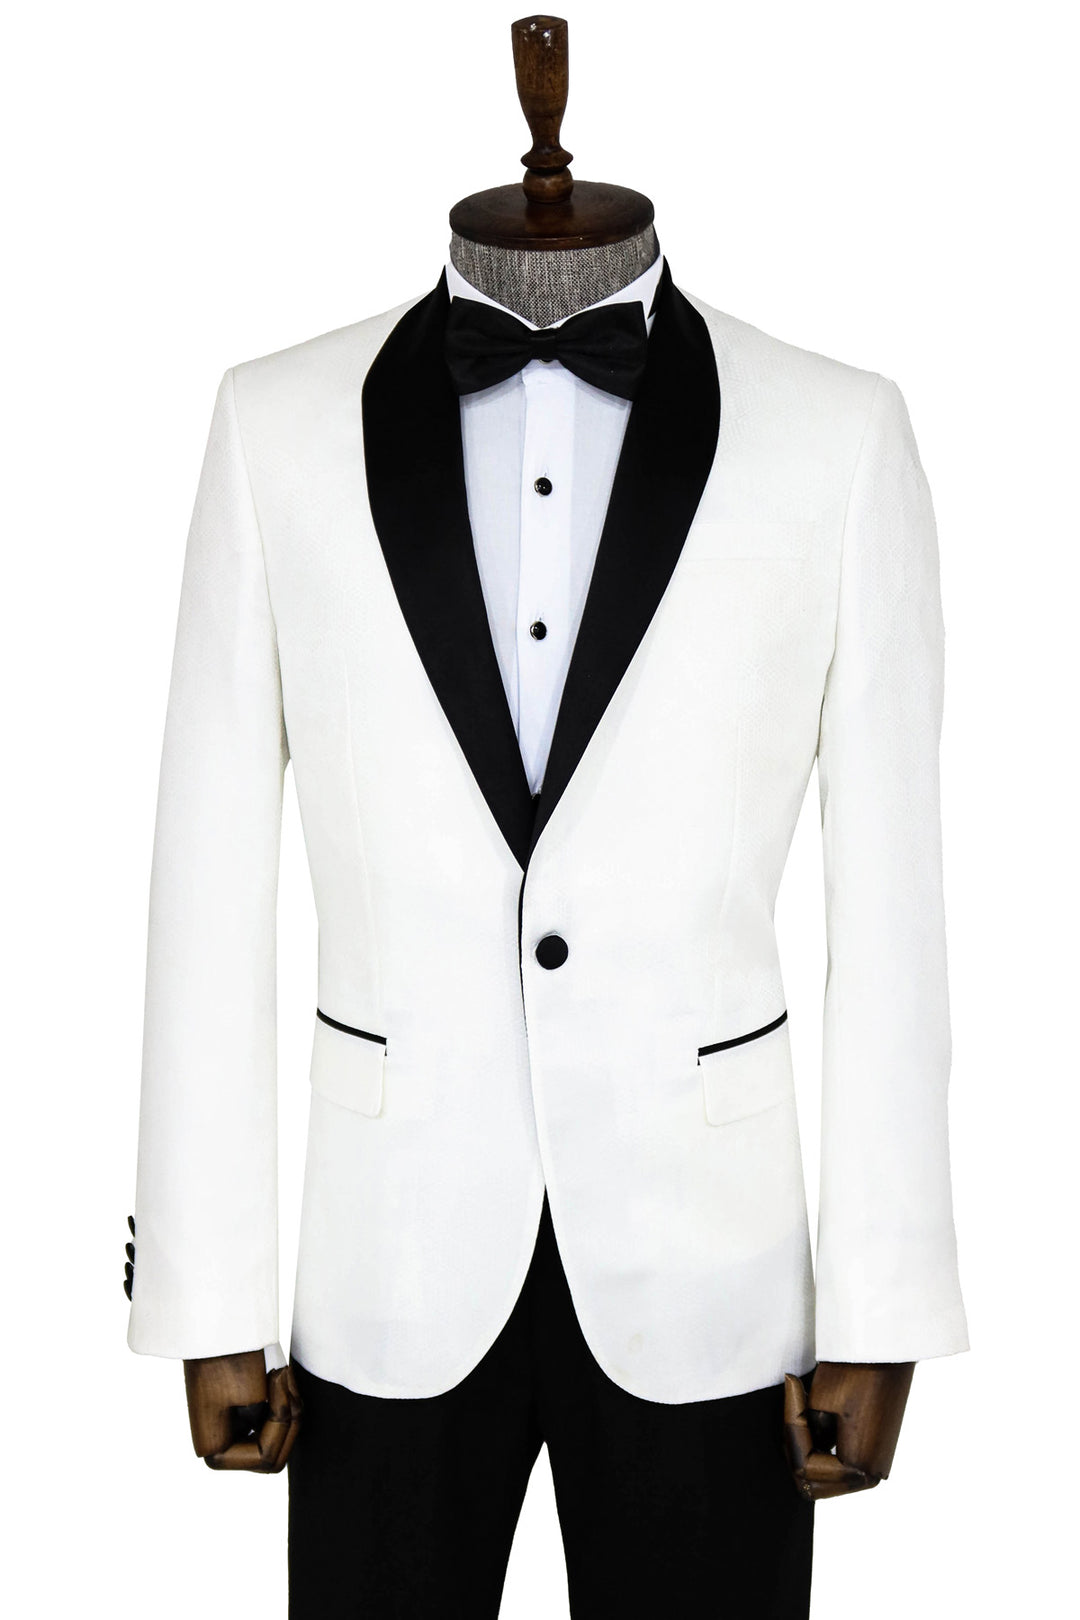 Pentagon Patterned Shawl Lapel White Men Prom Blazer and Trousers Combination- Wessi